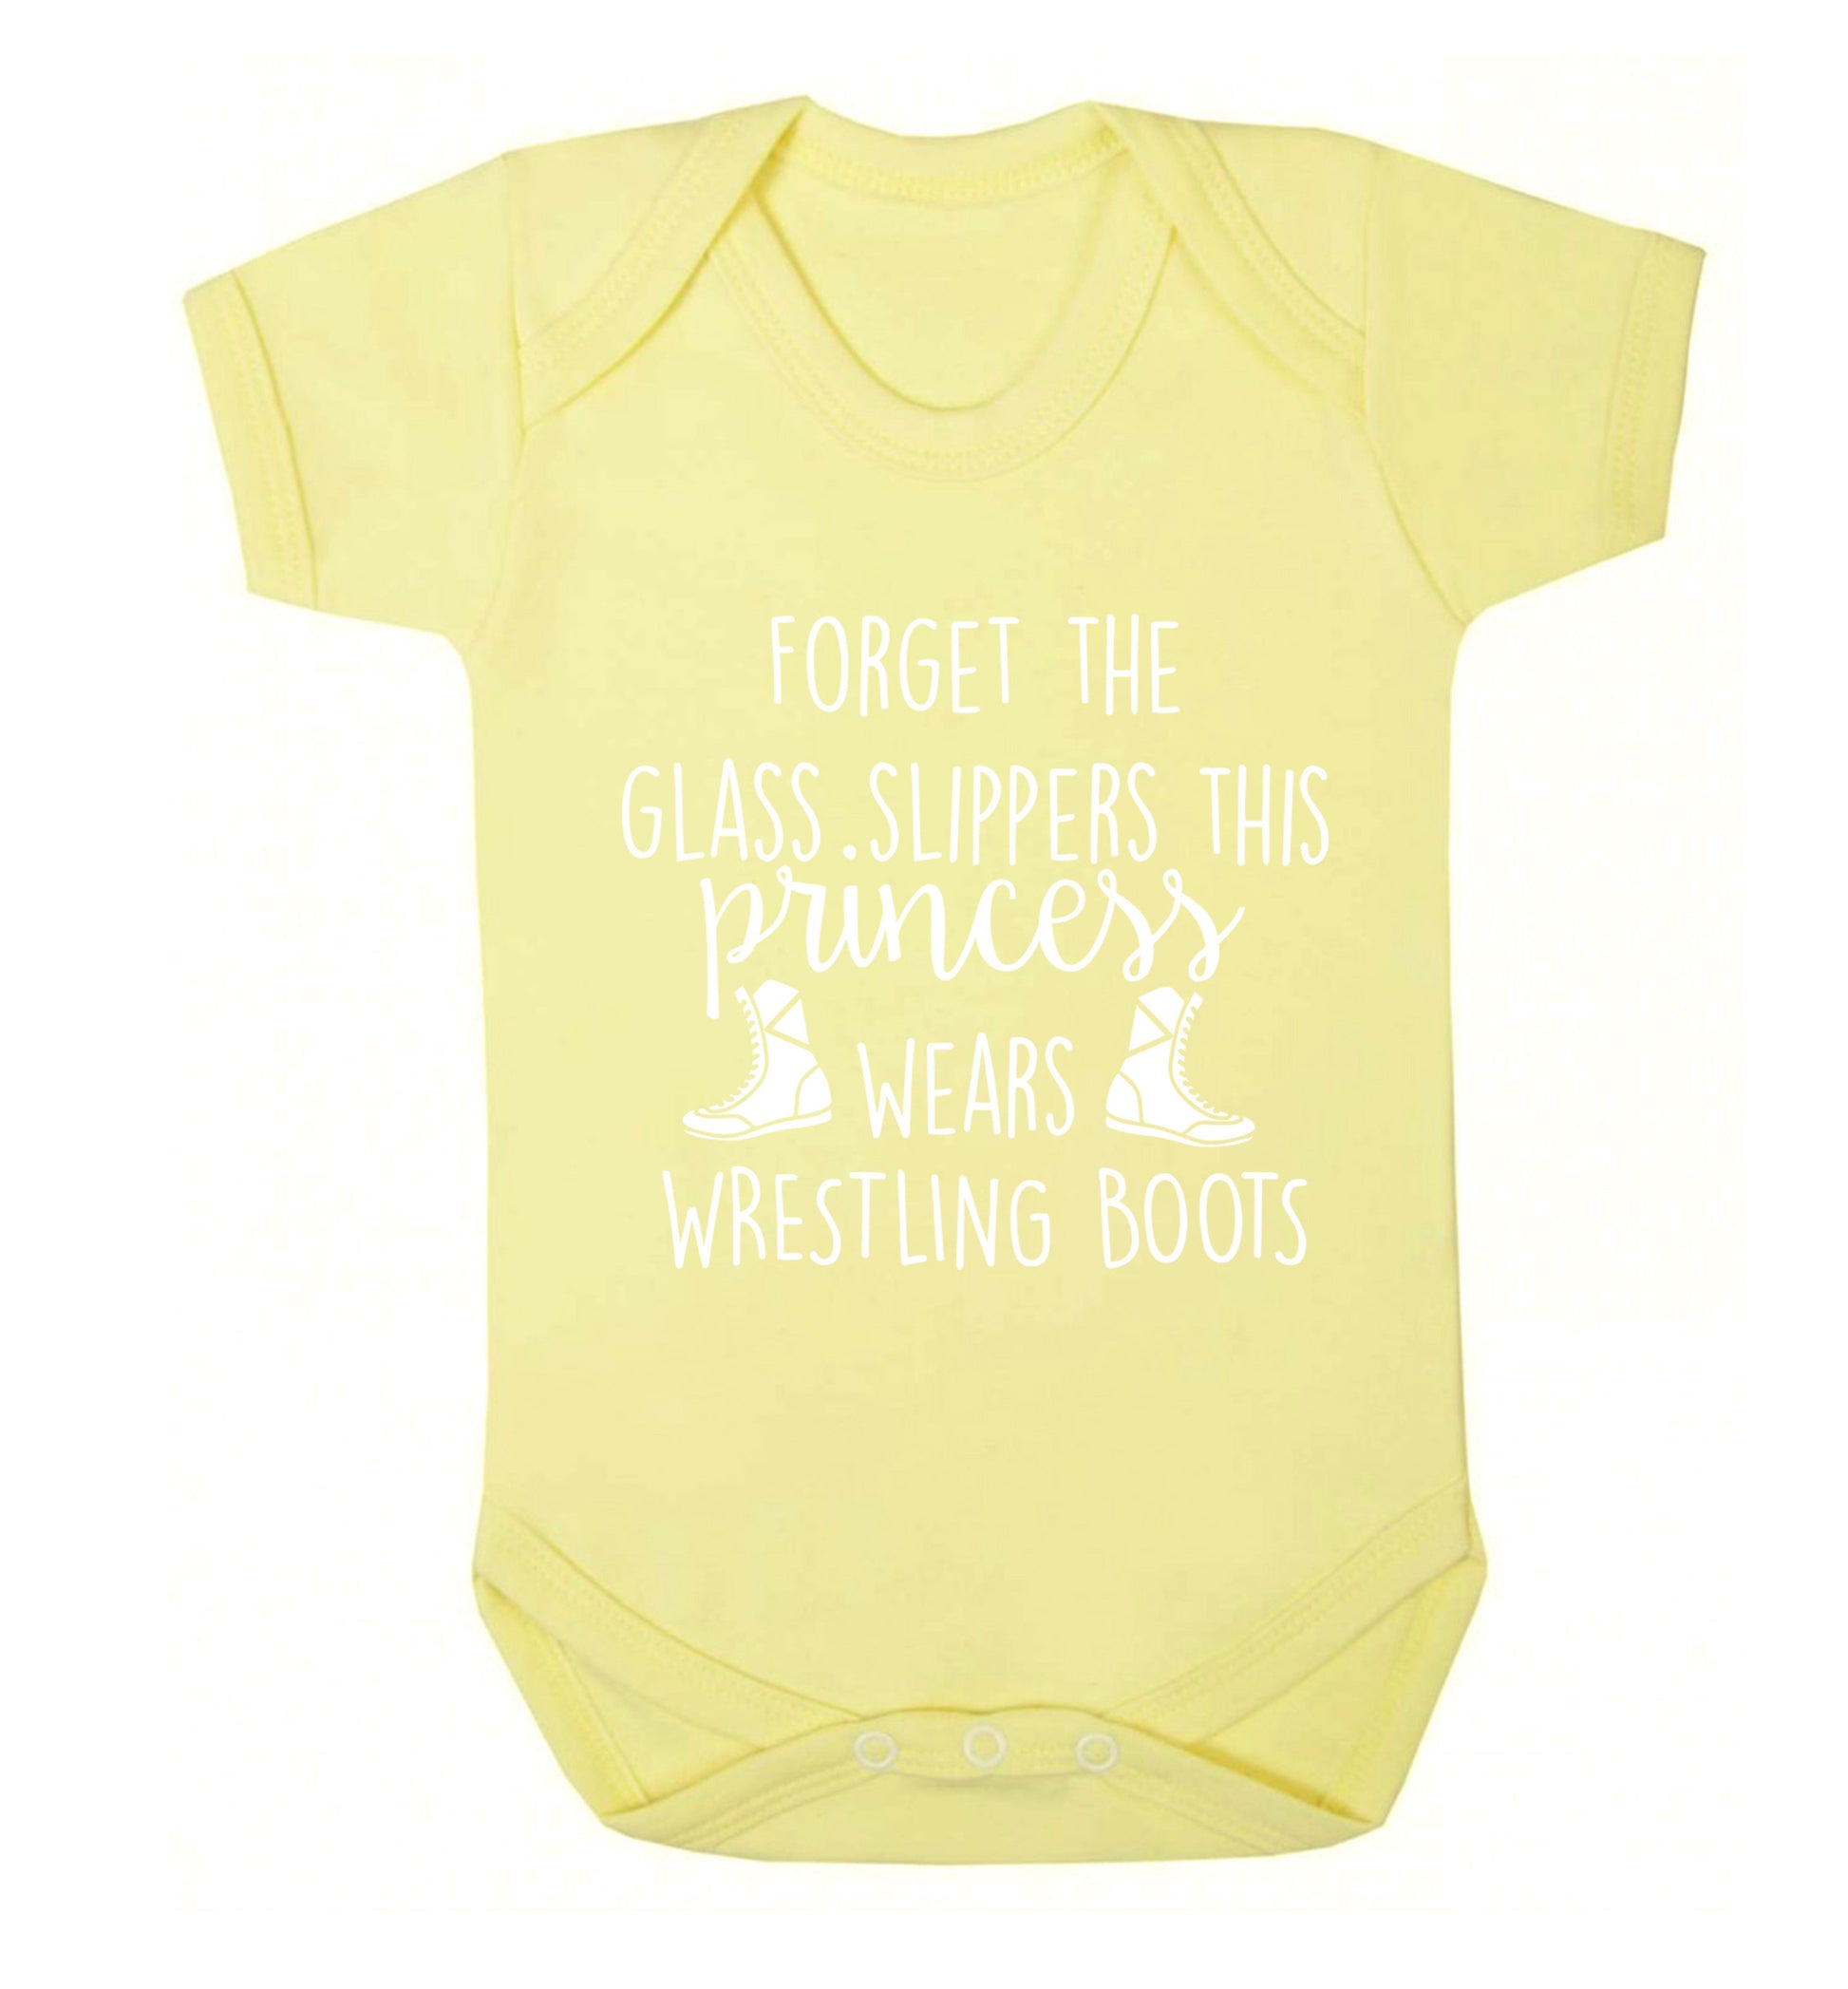 Forget the glass slippers this princess wears wrestling boots Baby Vest pale yellow 18-24 months